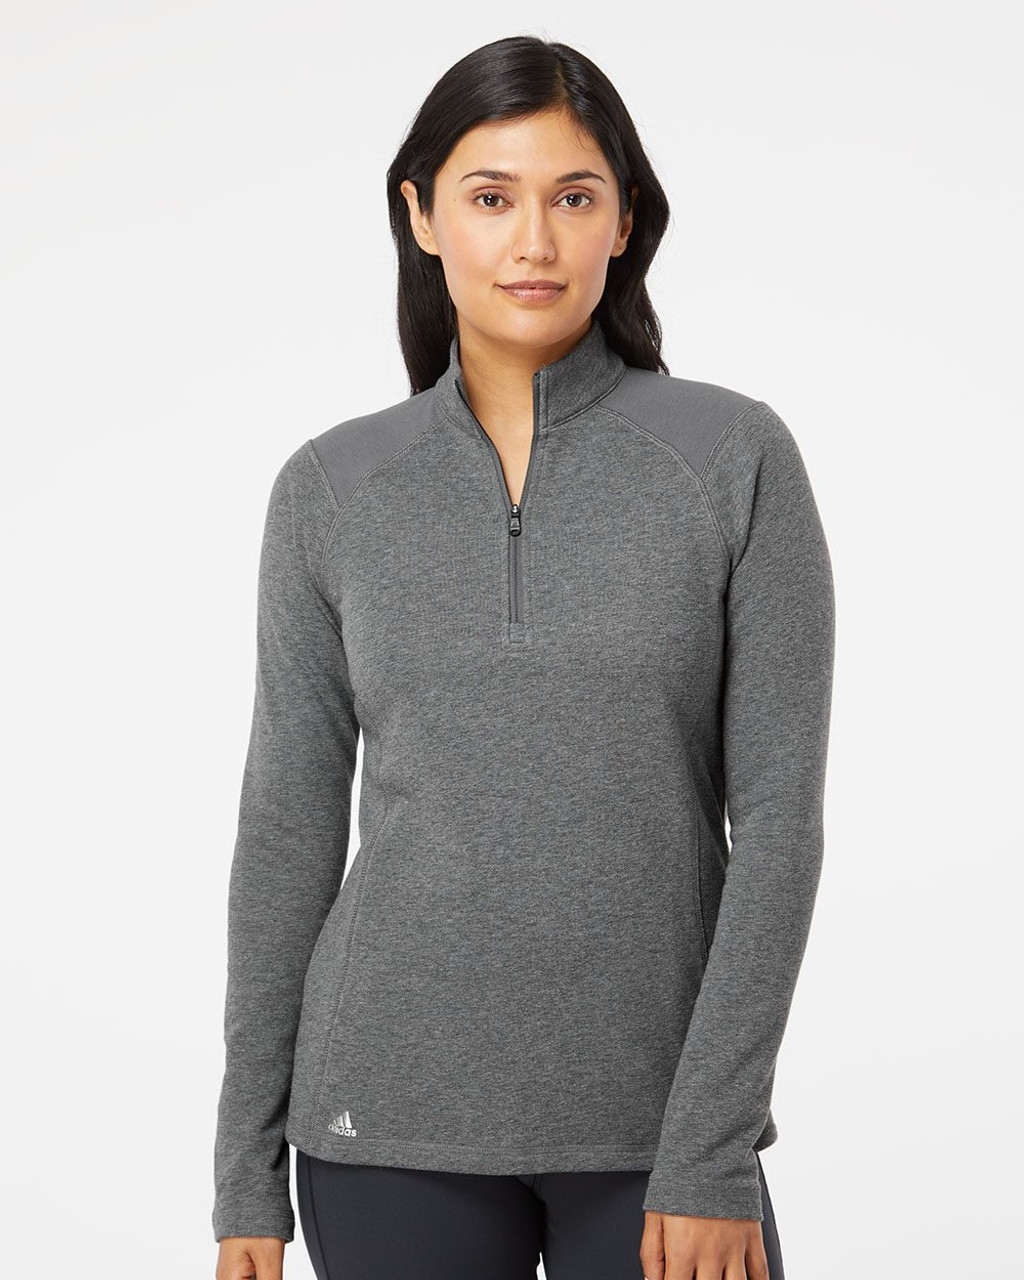 Custom Women's Heathered Quarter-Zip Pullover with Colorblocked Shoulders - A464